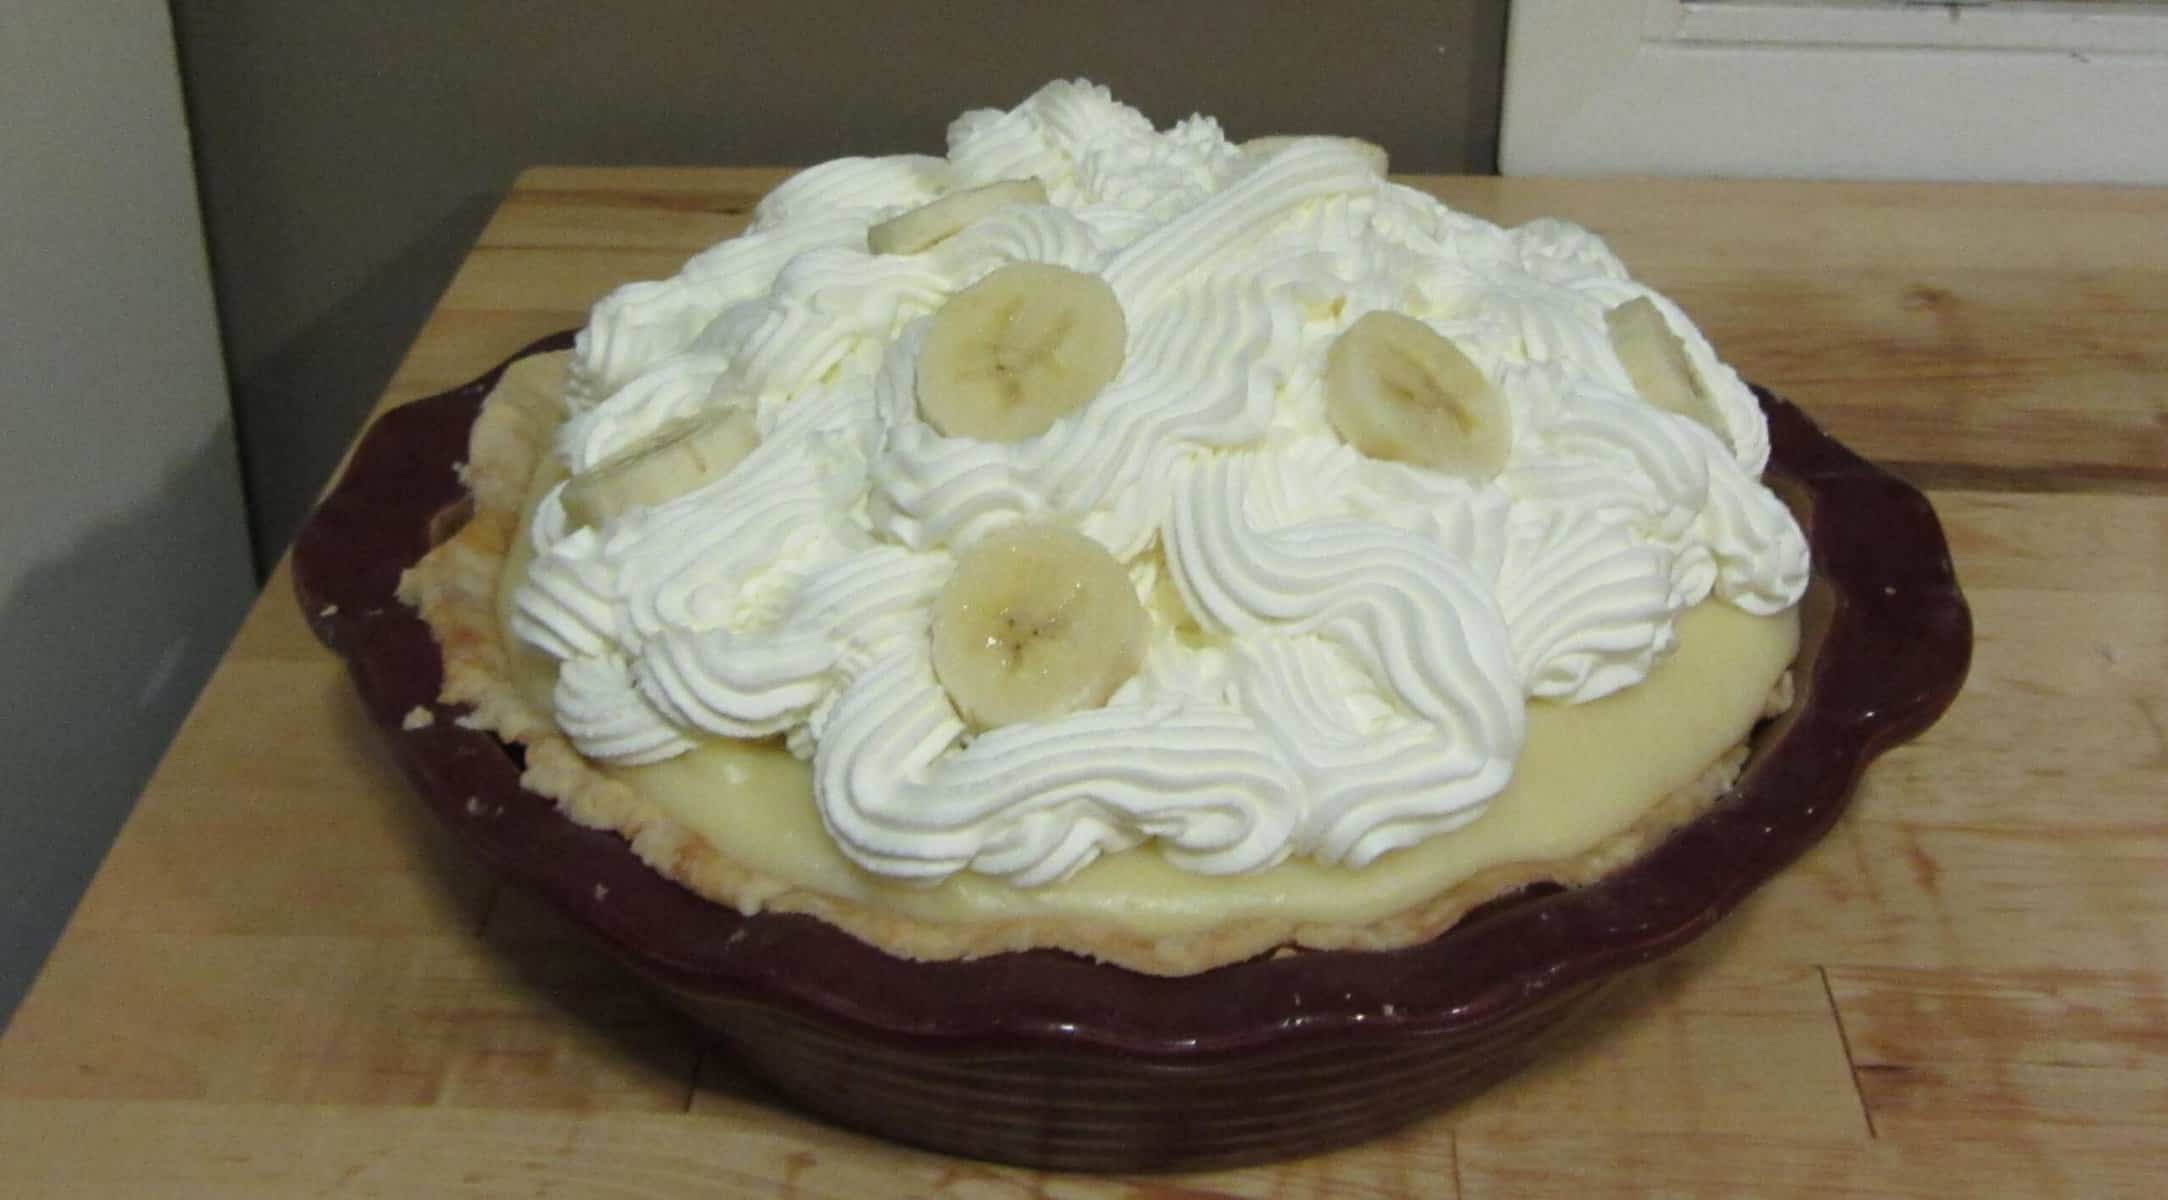  Savor the sweetness of this heavenly Whipped Topping Banana Cream Pie.